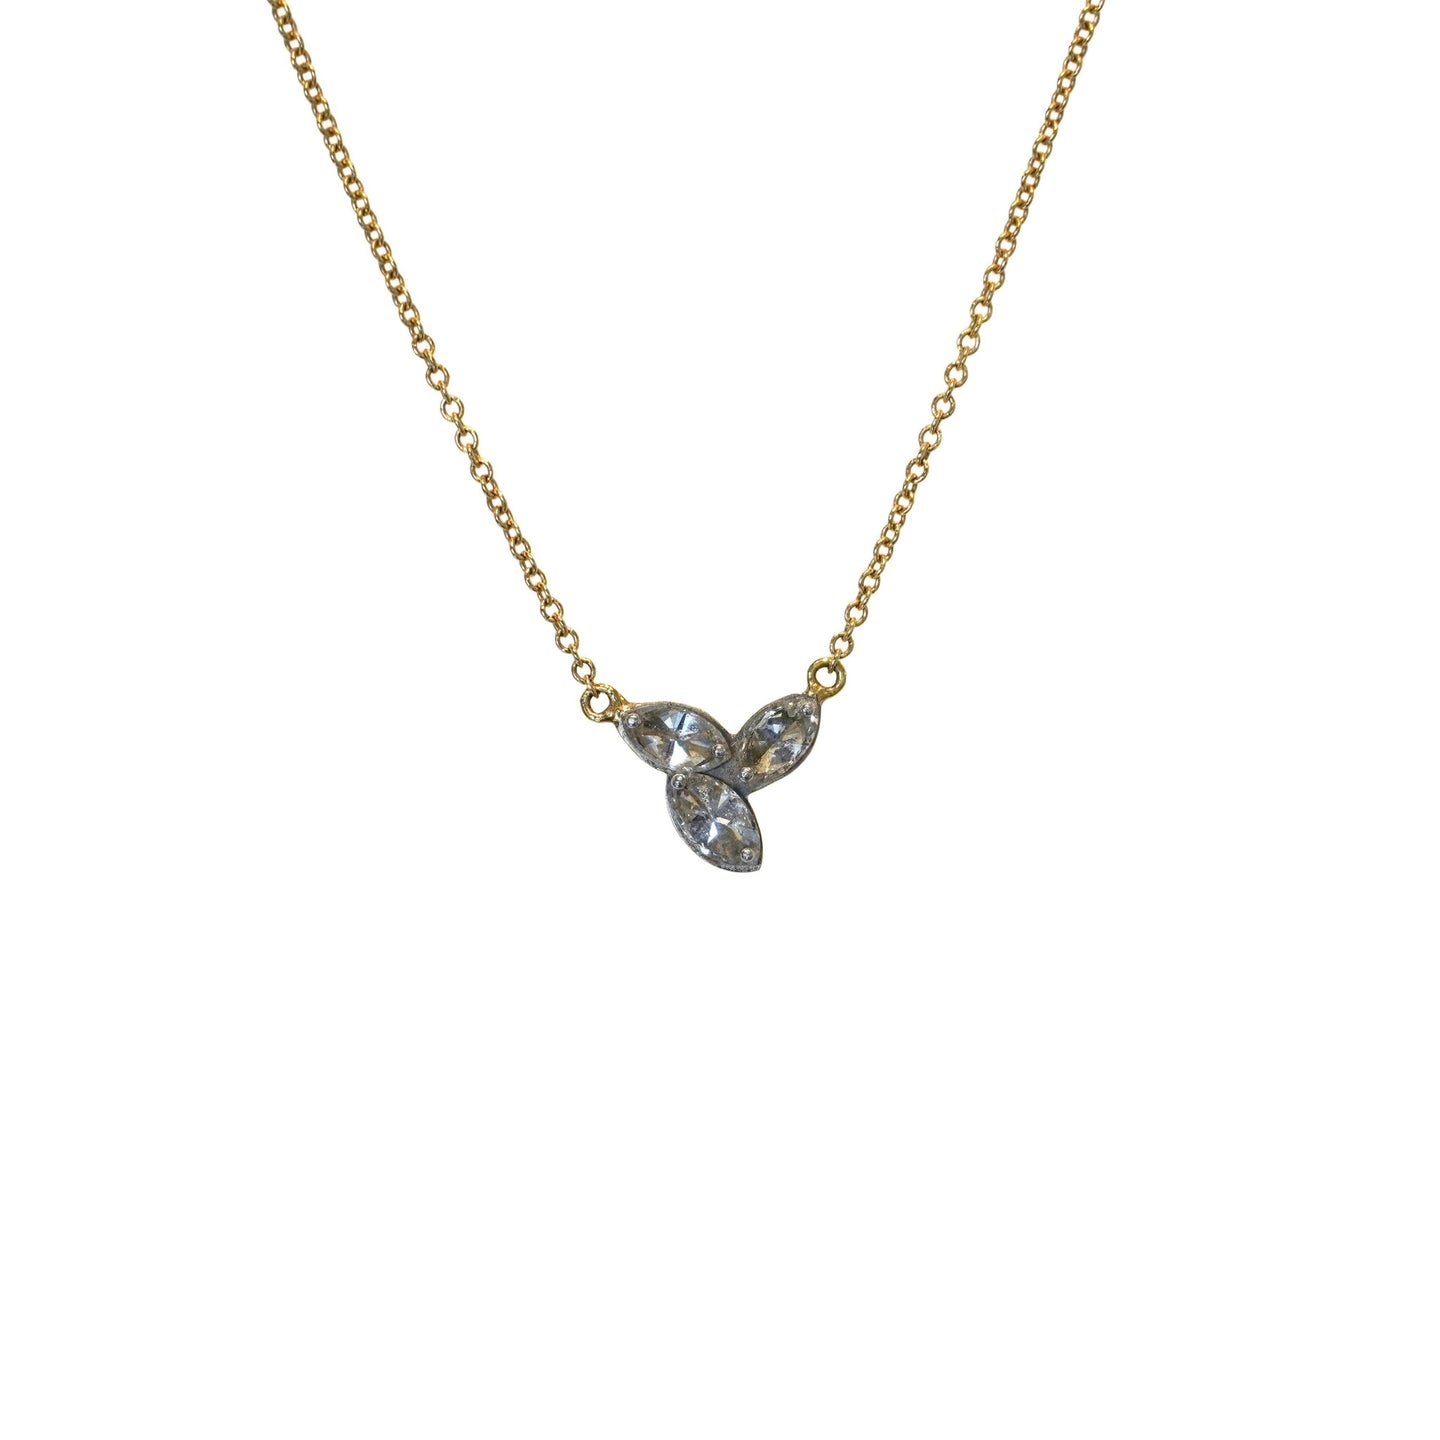 Inverted Marquise Diamond Necklace